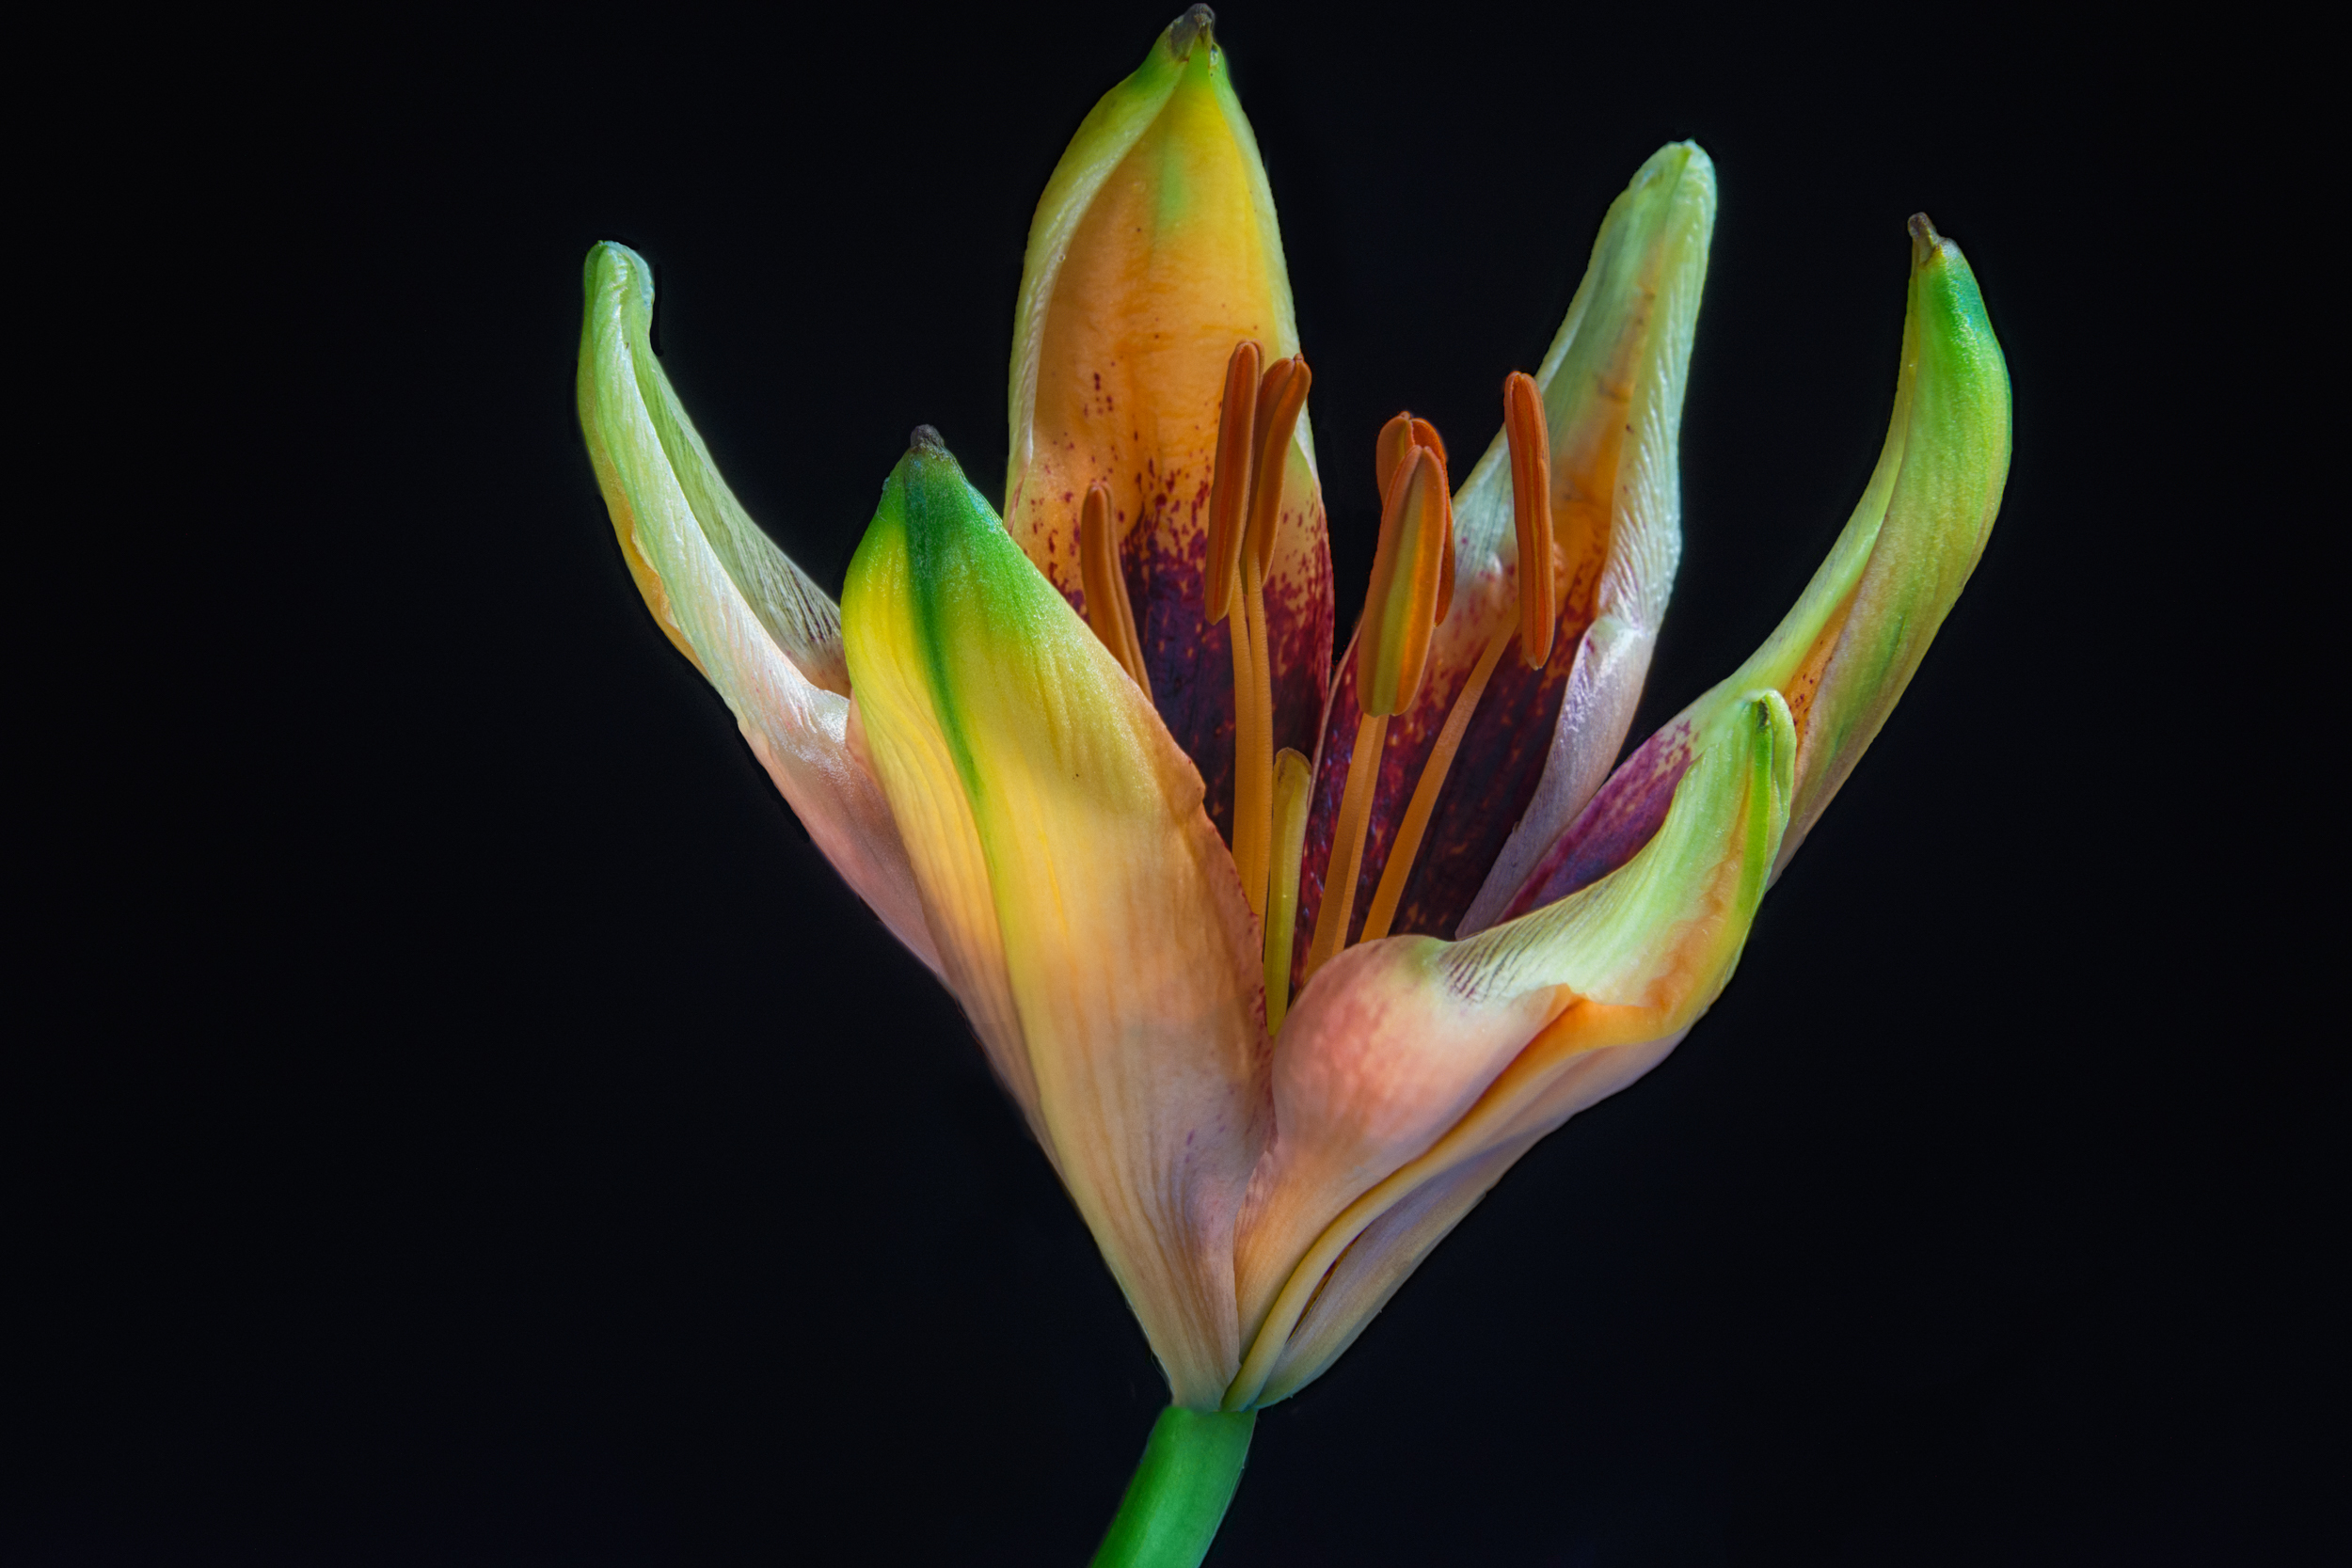 Tango Lily to see more images go to webite: